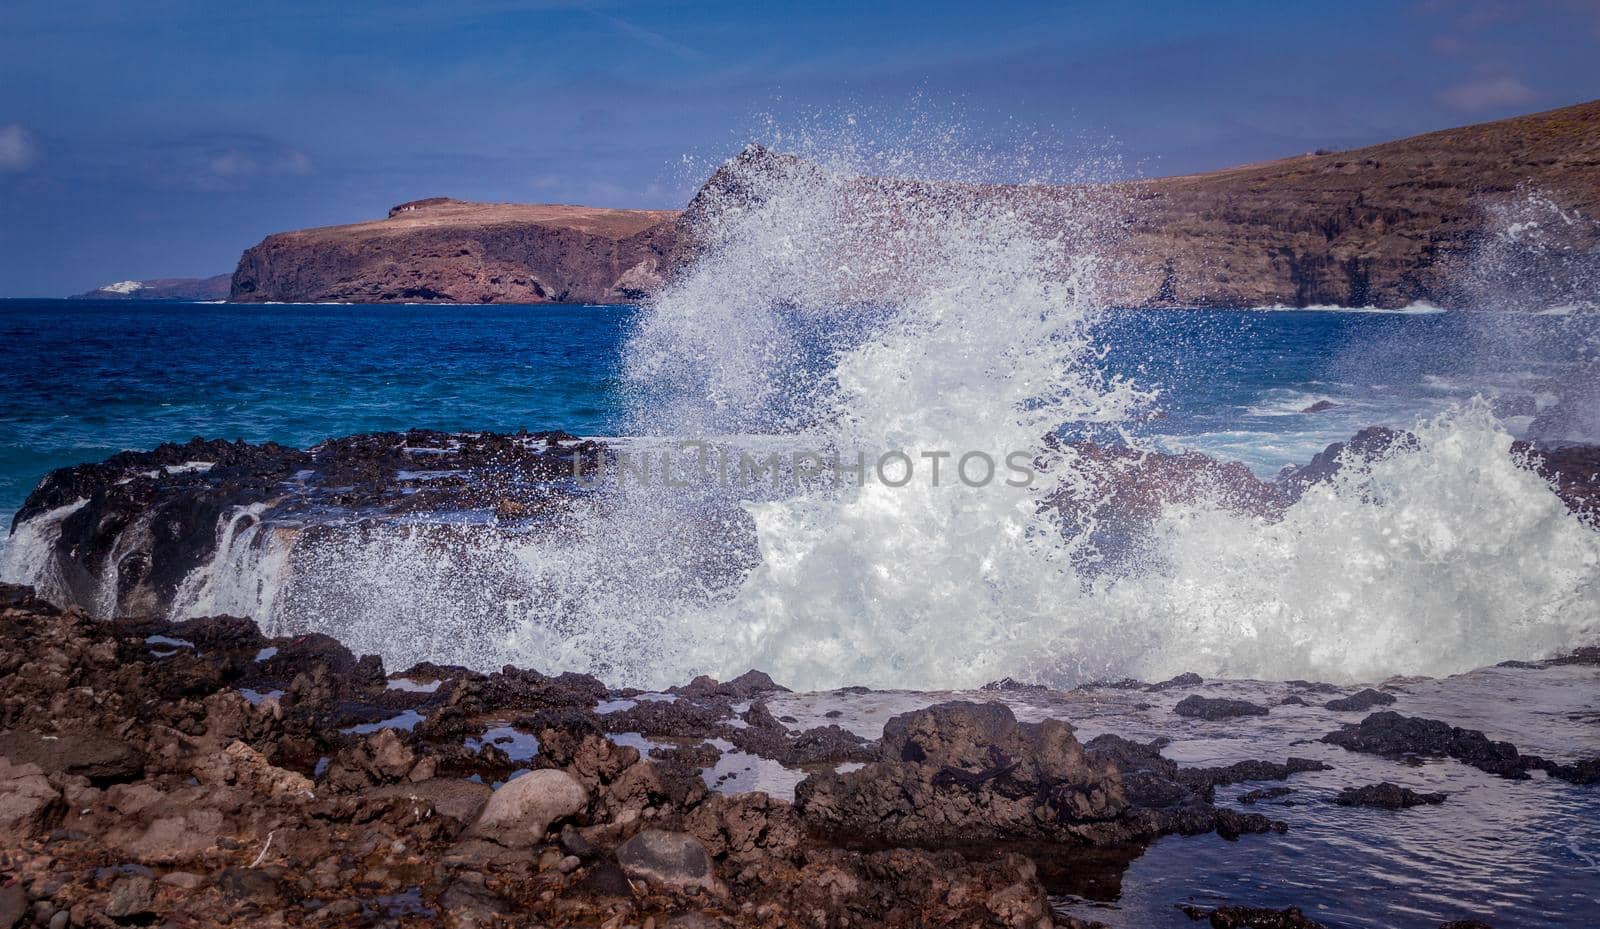 Wide shot of a rocky beach with waves breaking on the rocks on a sunny day